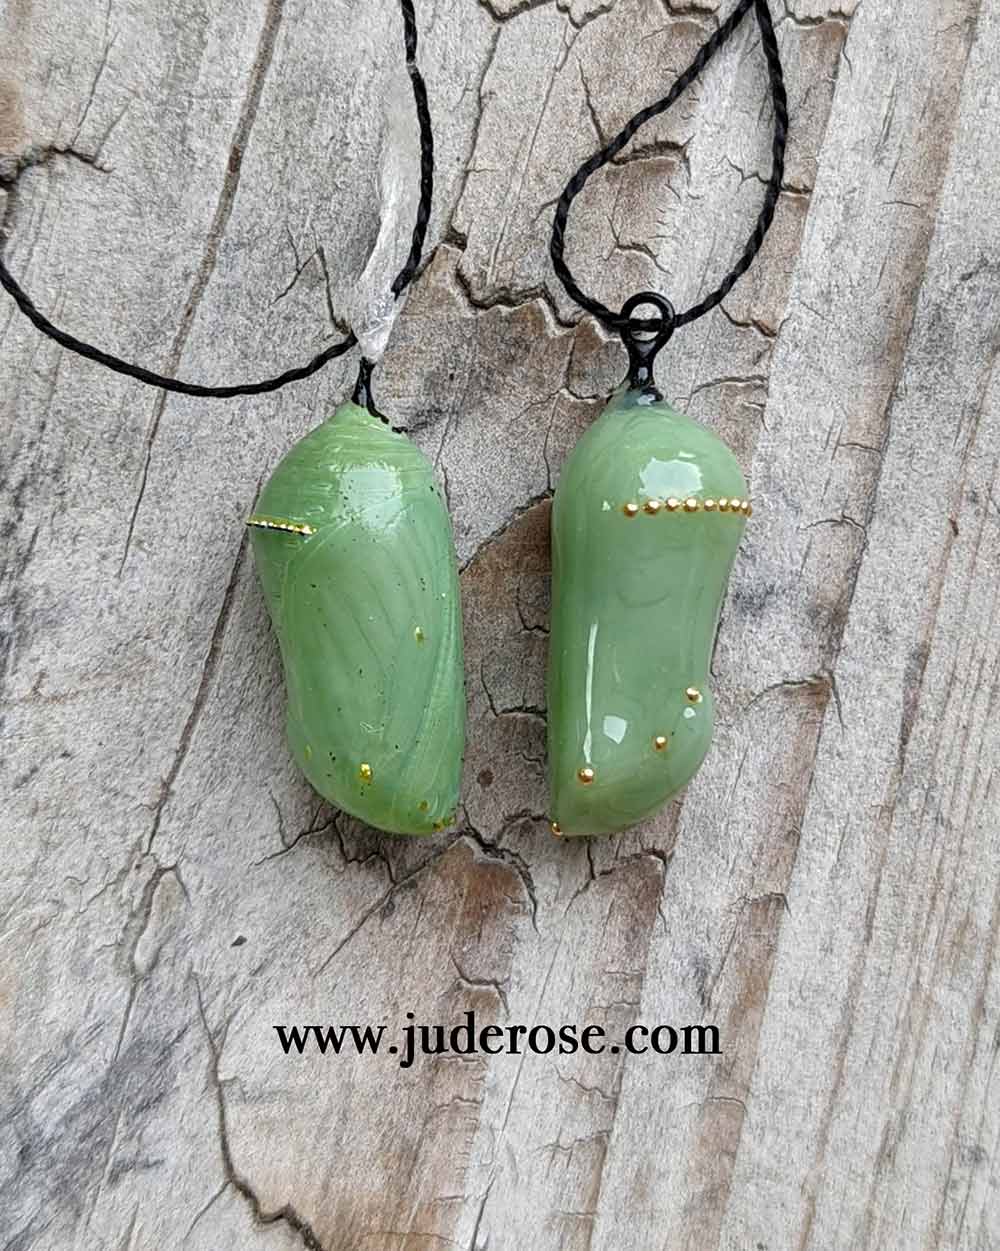 Side view of actual Monarch chrysalis next to a Jude Rose replica of Monarch chrysalis in glass and 24k gold